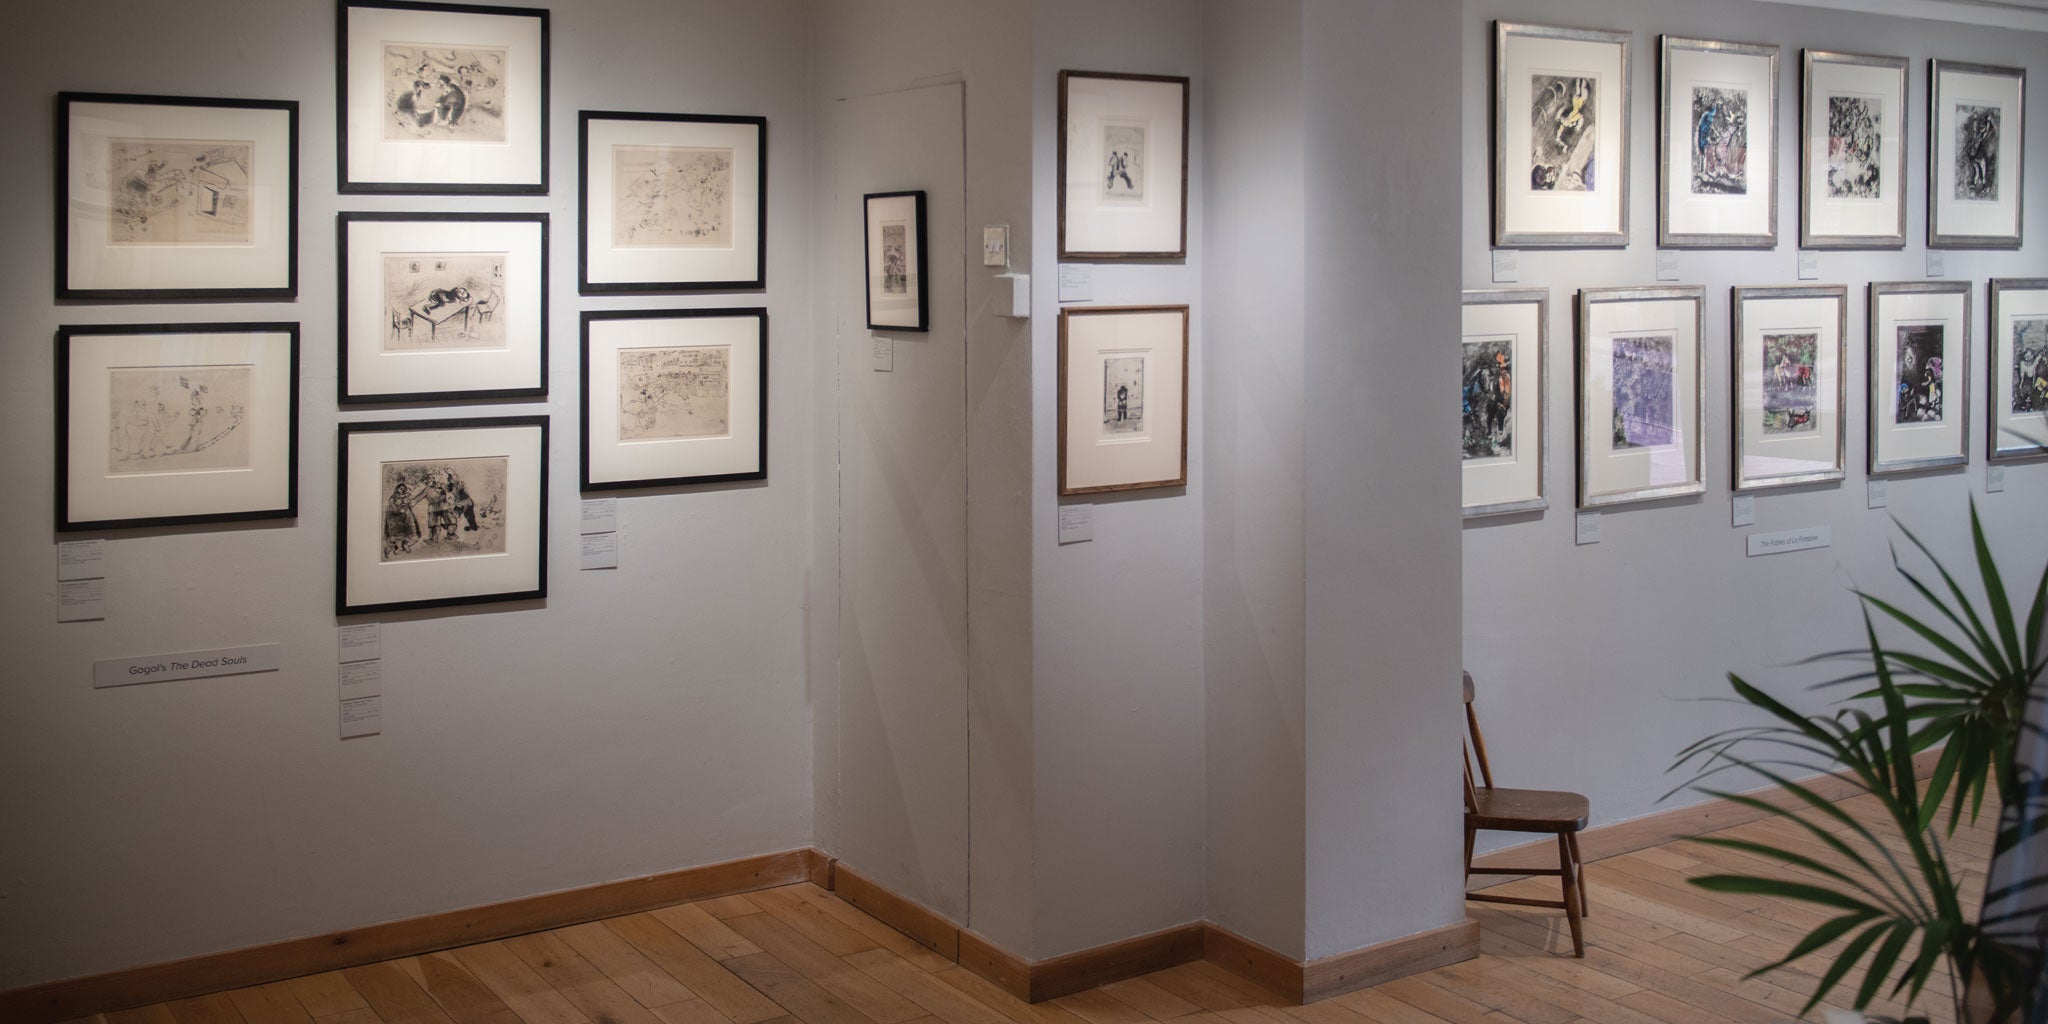 Marc Chagall Exhibition of Original Prints for Sale